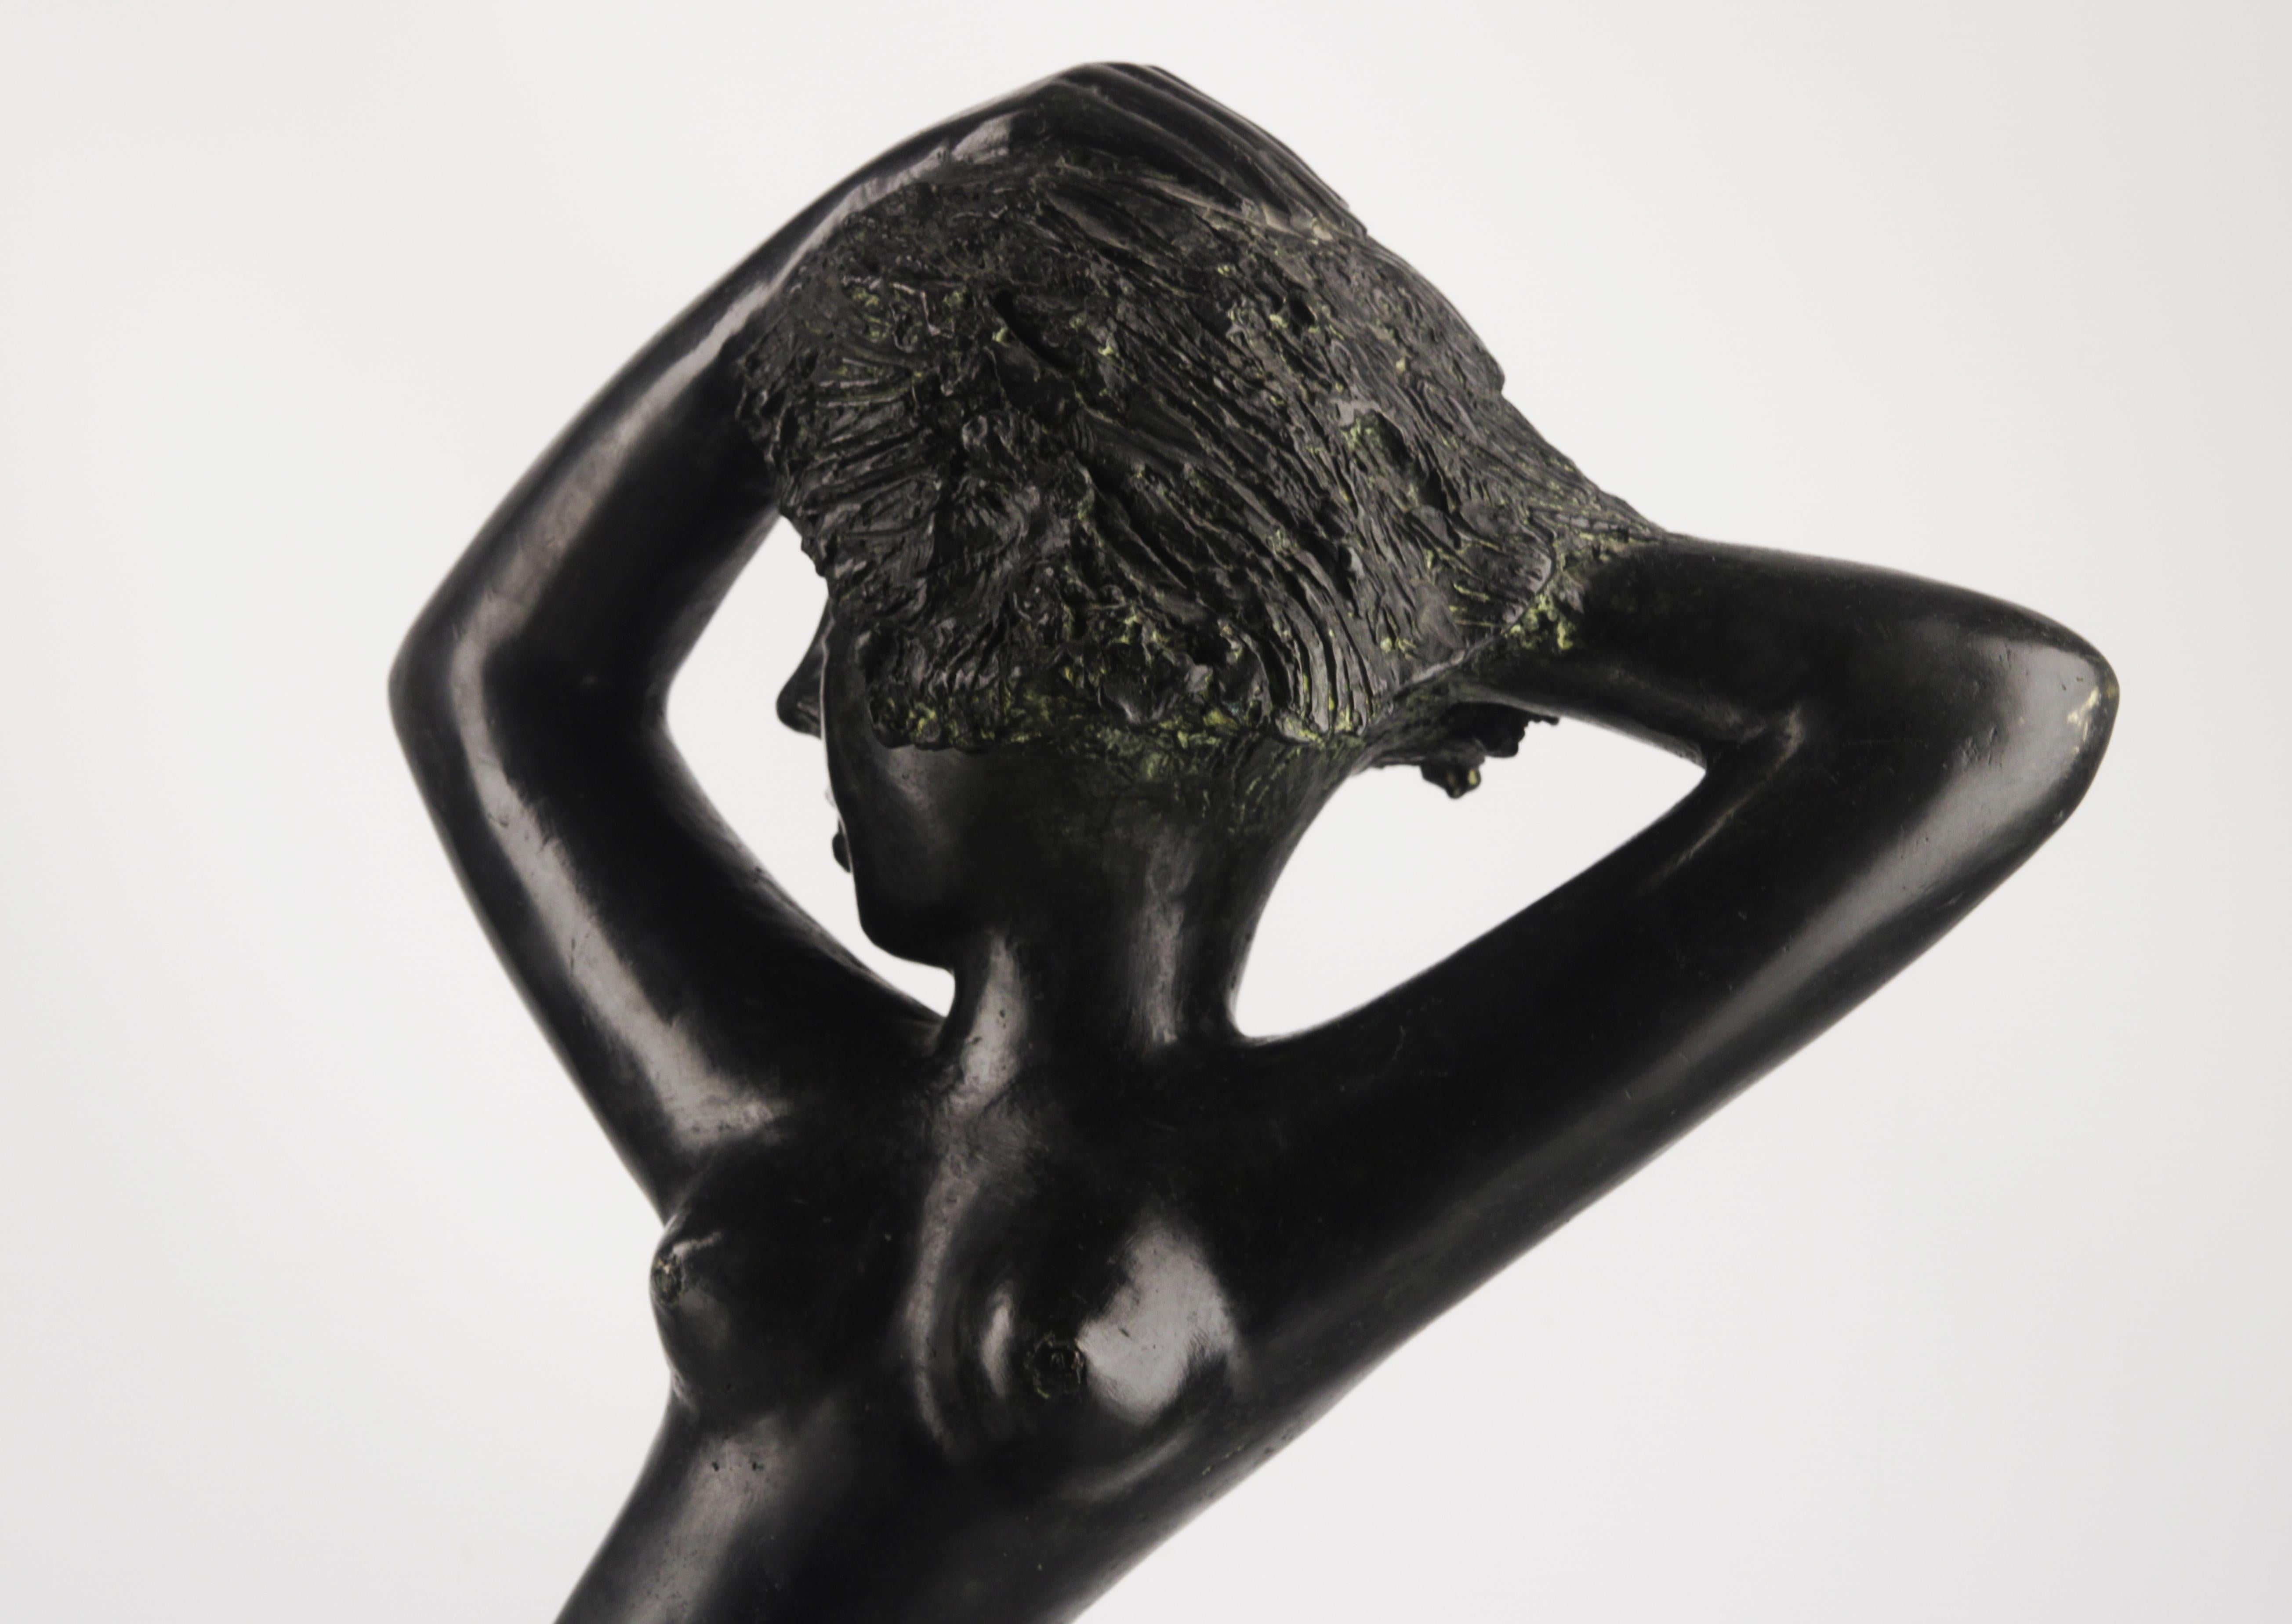 Argentine nude woman bronze sculpture Mariano Pages For Sale